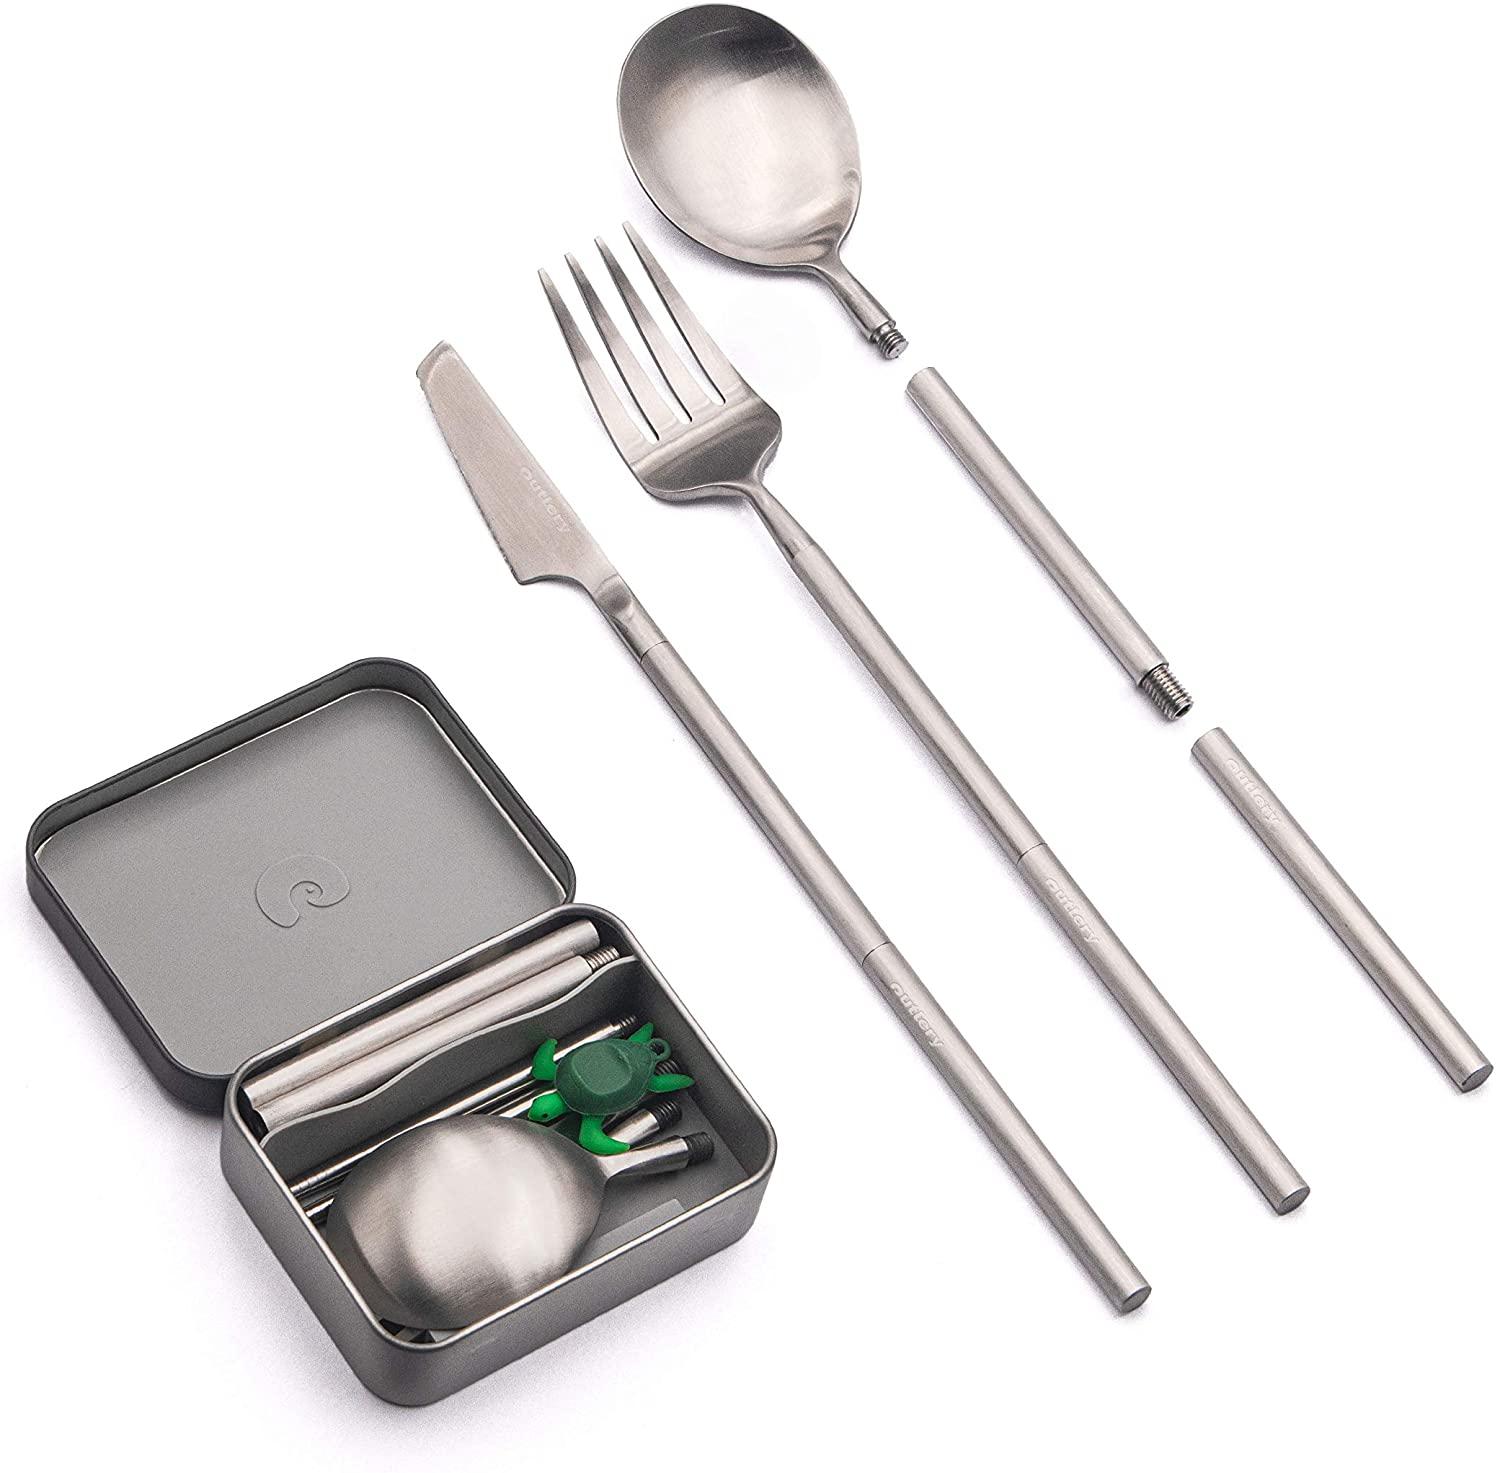 https://www.dontwasteyourmoney.com/wp-content/uploads/2021/06/outlery-portable-reusable-stainless-steel-travel-cutlery-set-camping-utensils.jpg